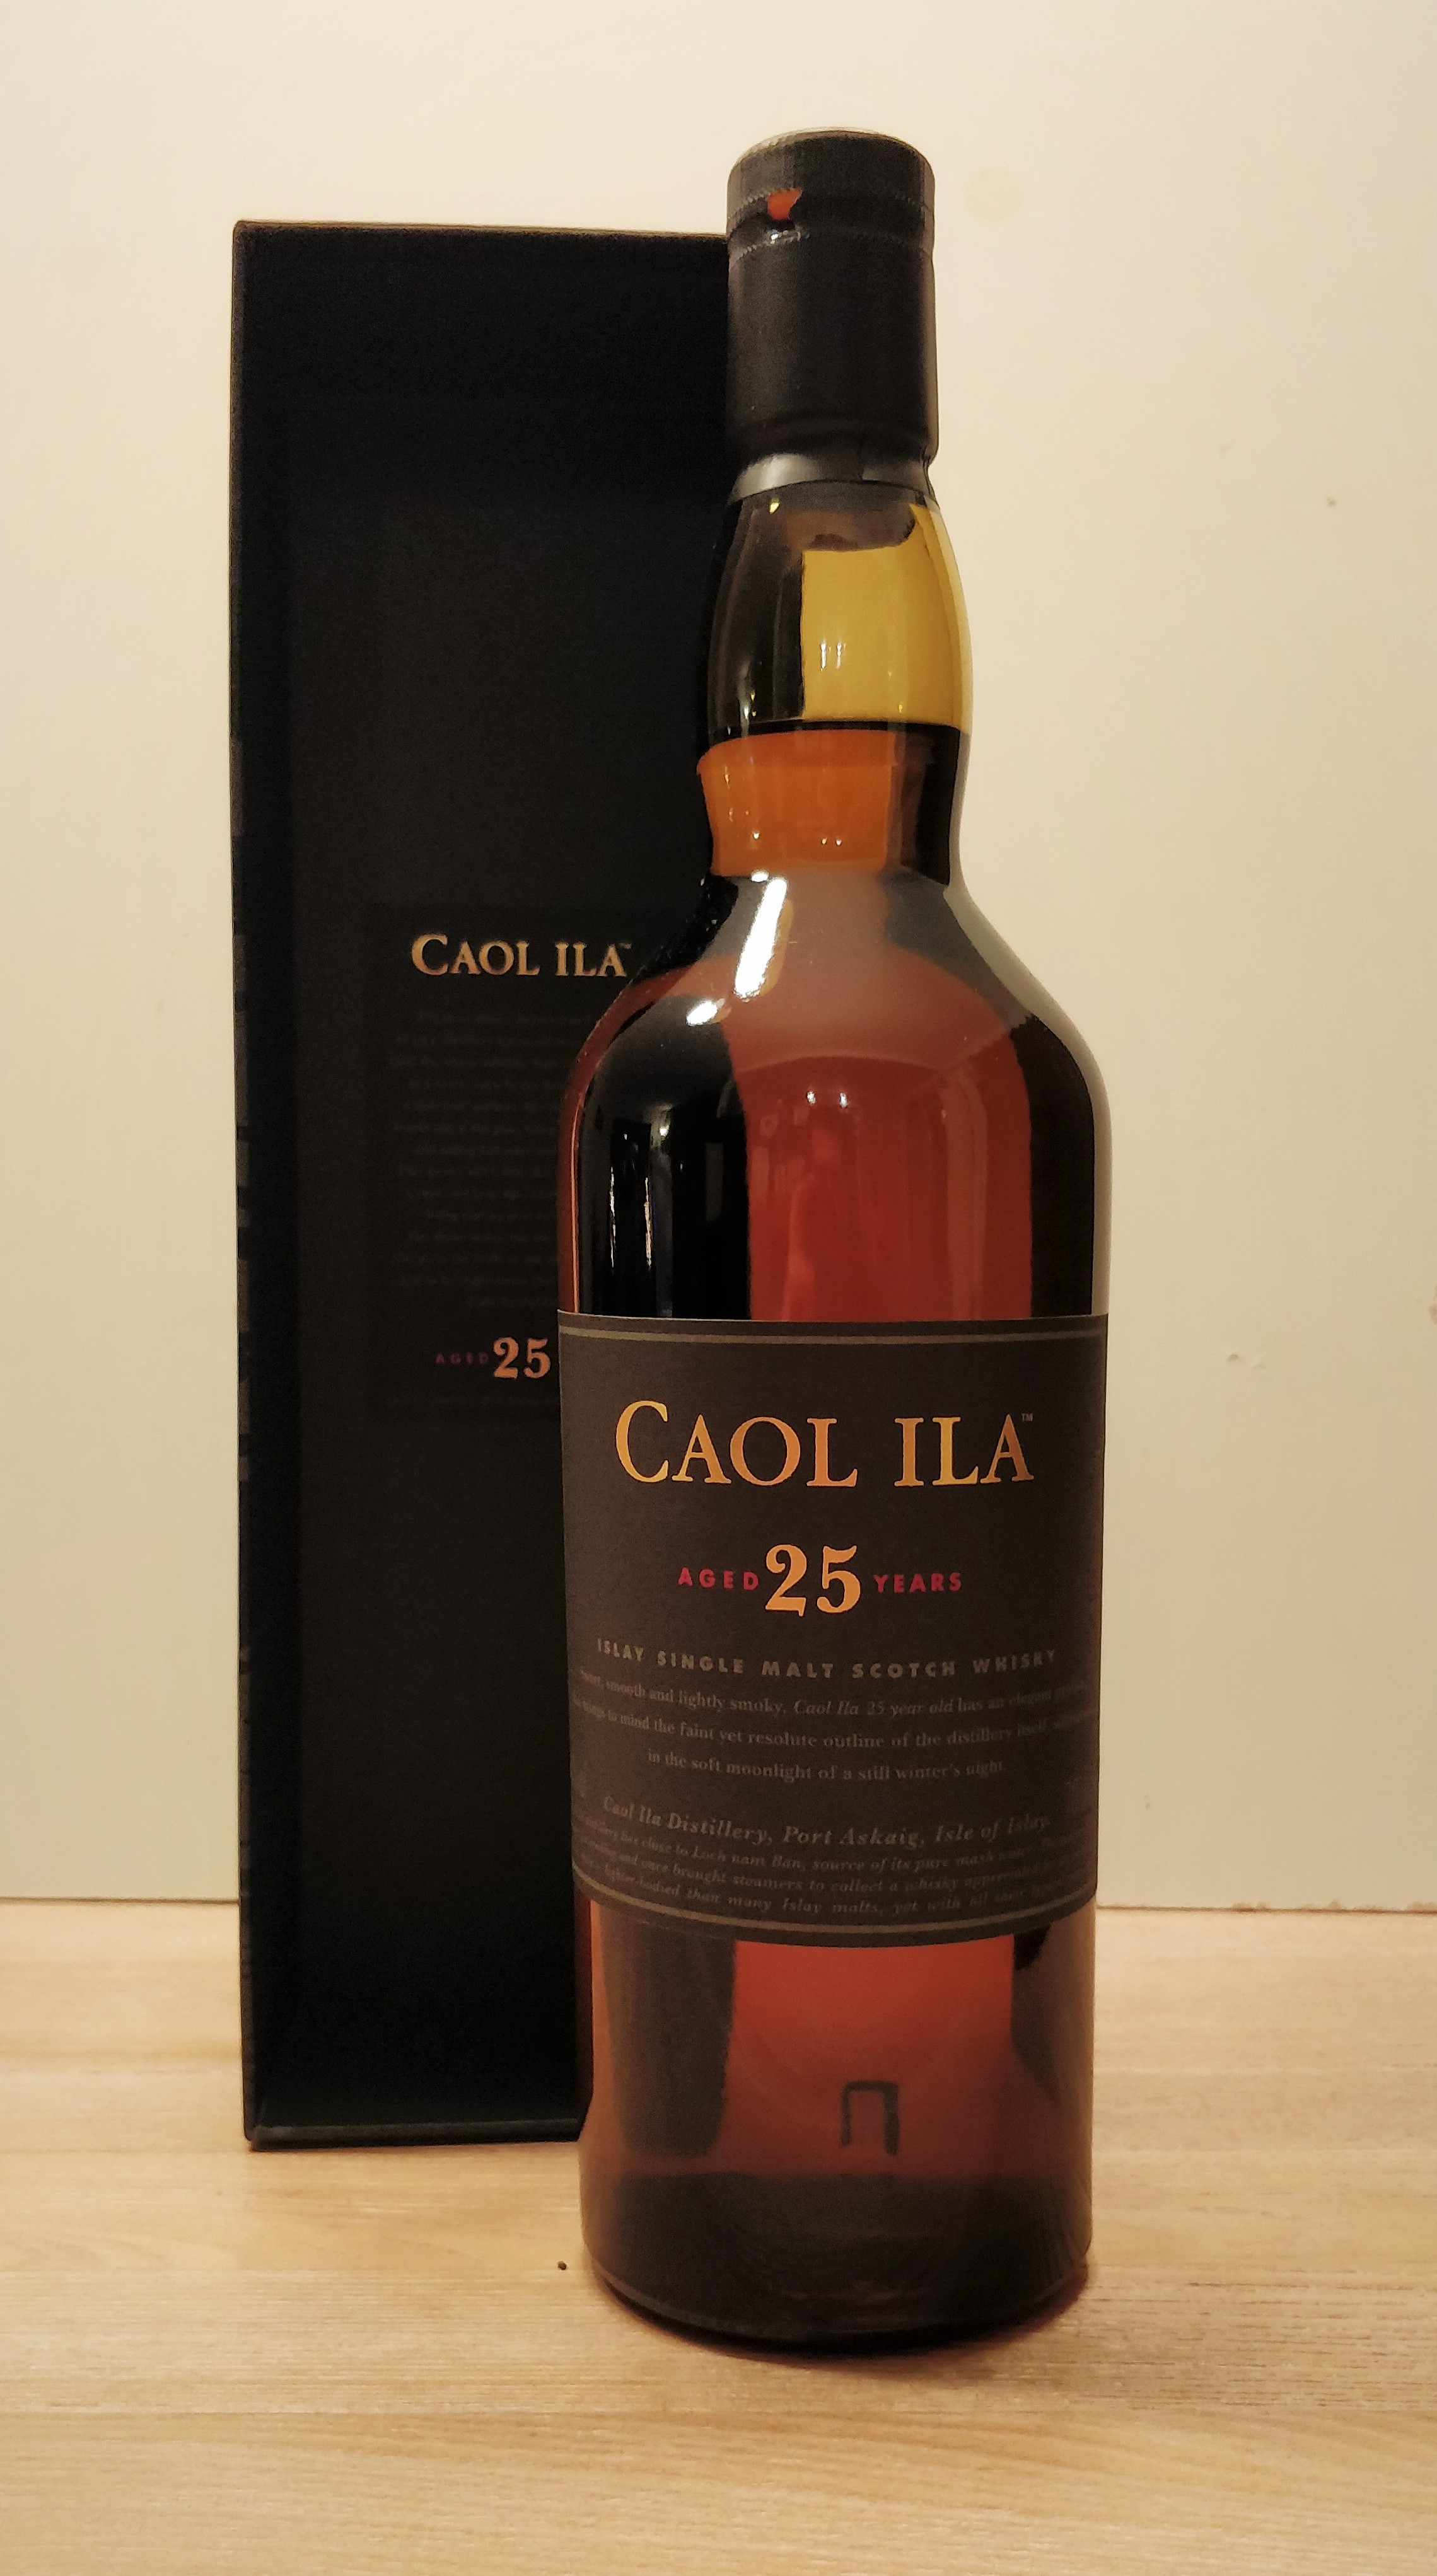 Caol Ila 25 year old – whiskystories